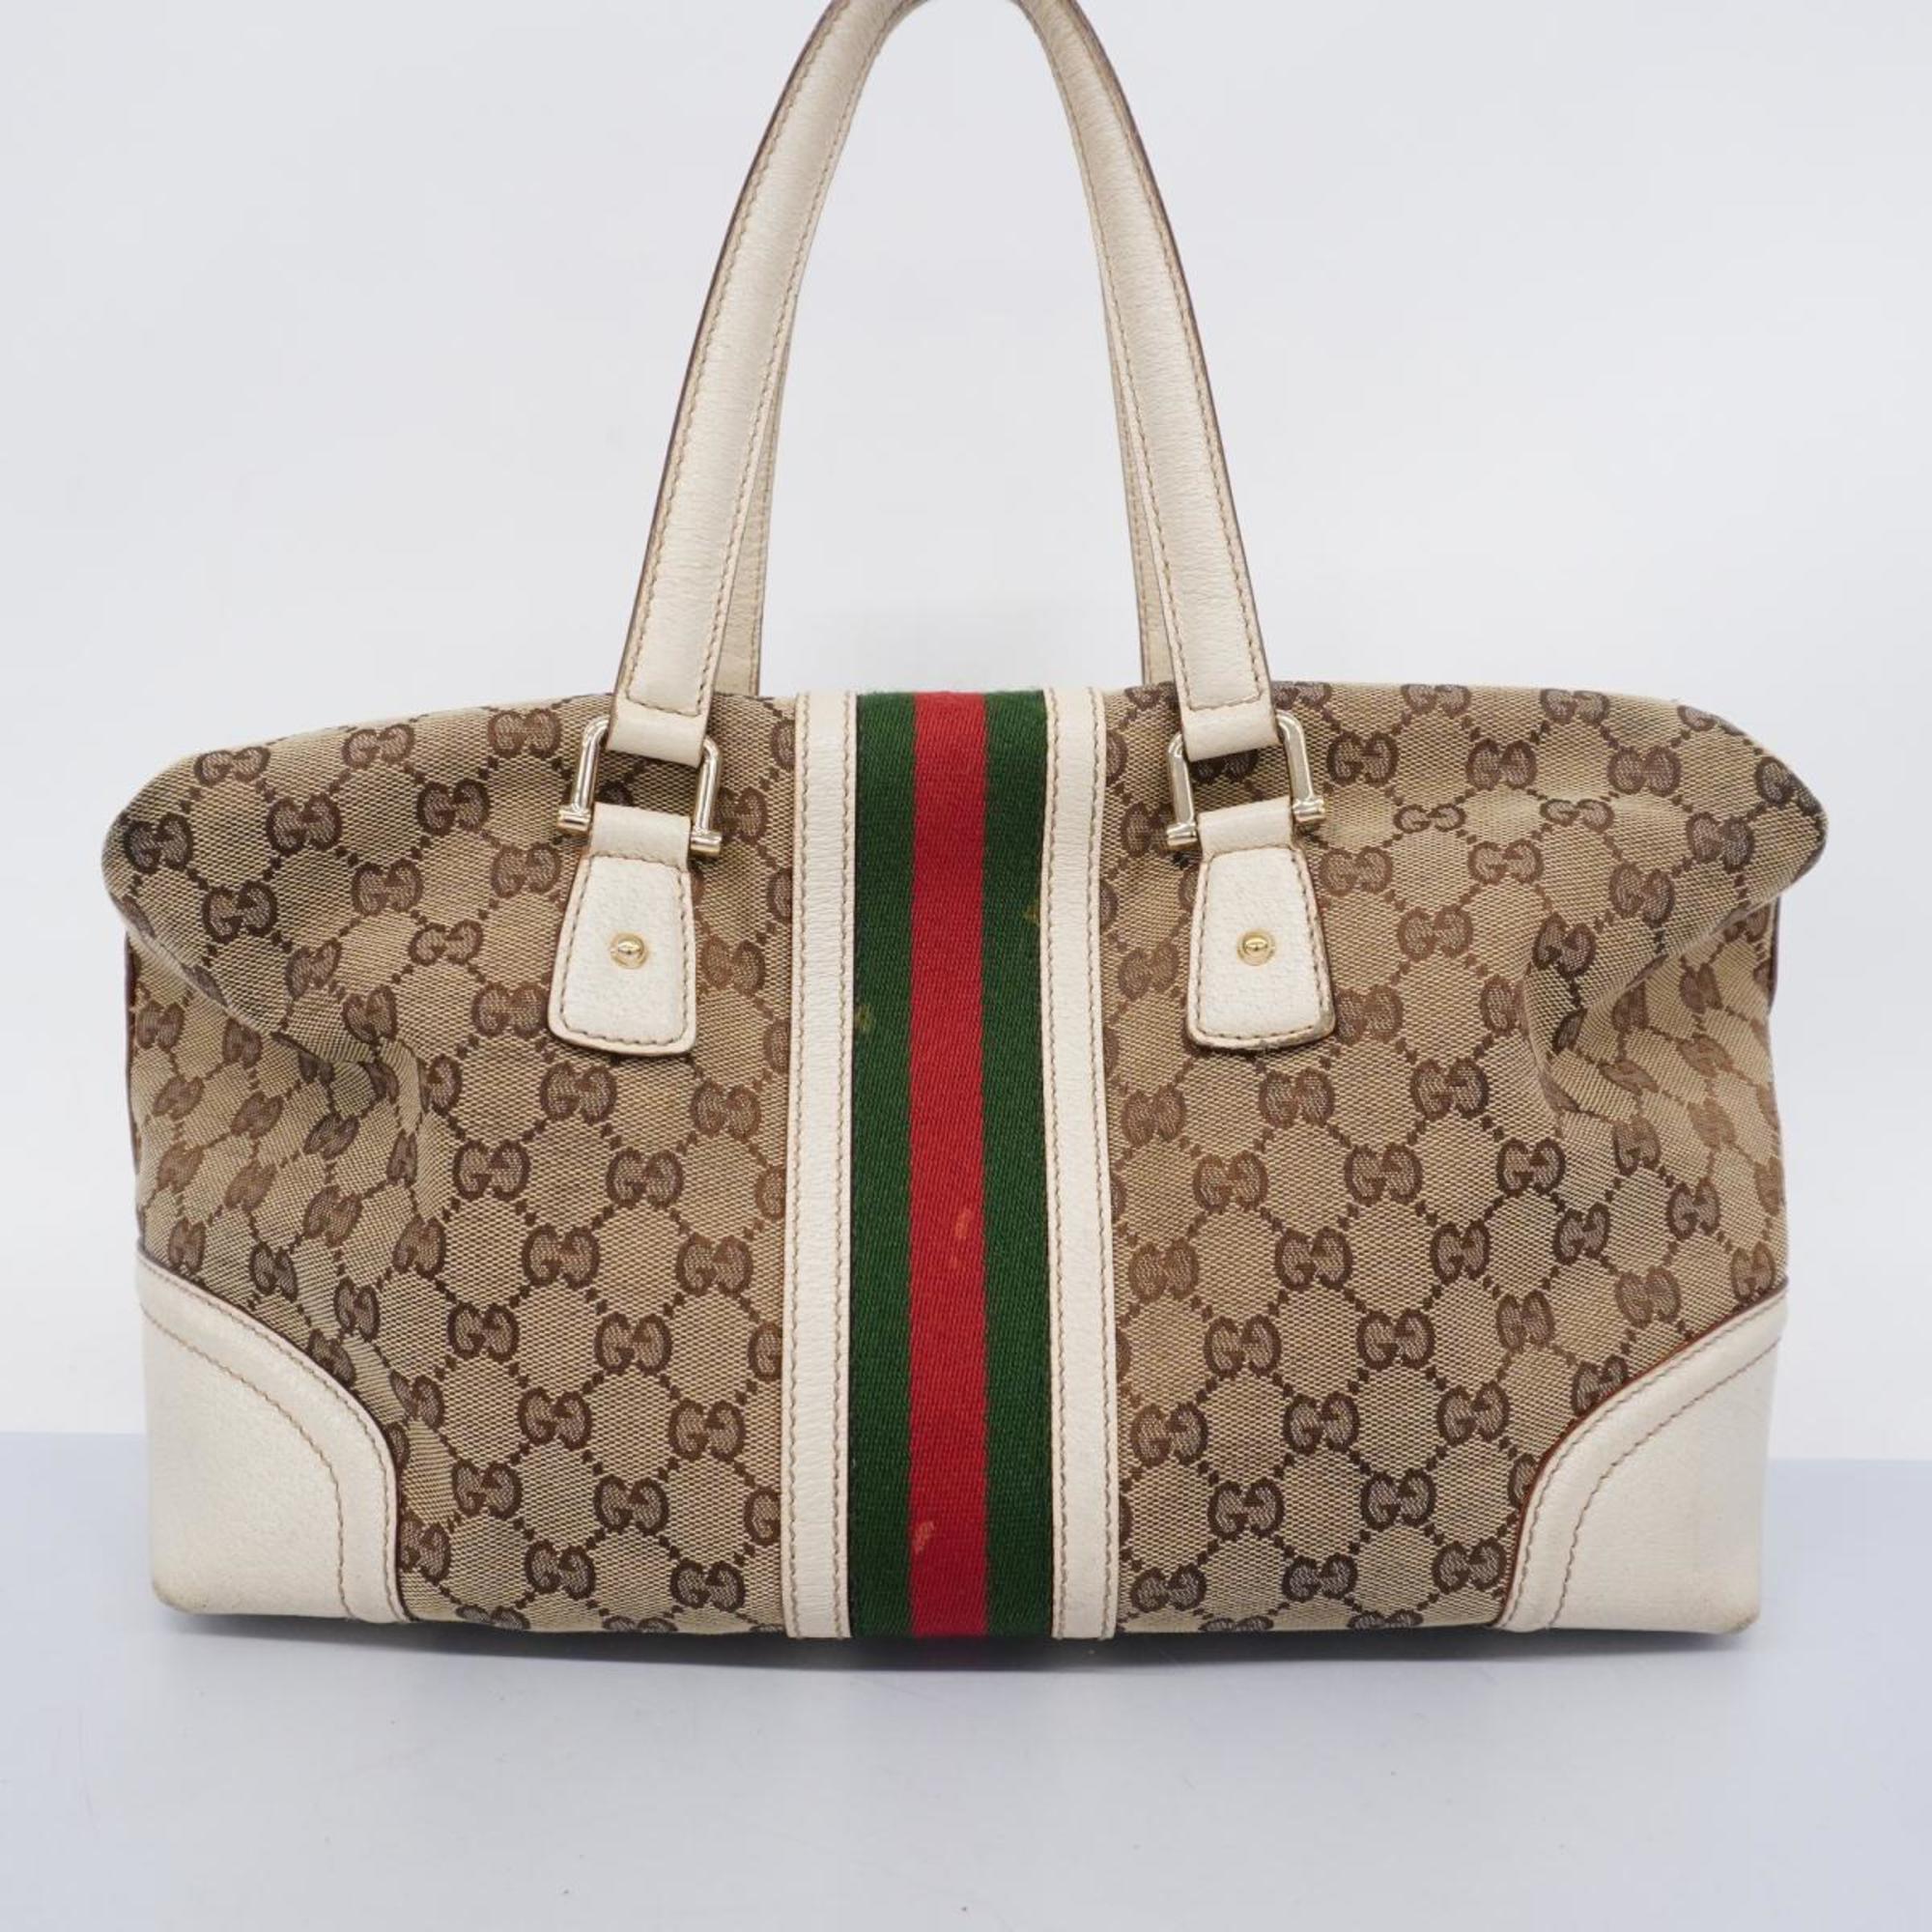 Gucci Handbag GG Canvas Sherry Line 150335 Leather Ivory Beige Champagne Women's